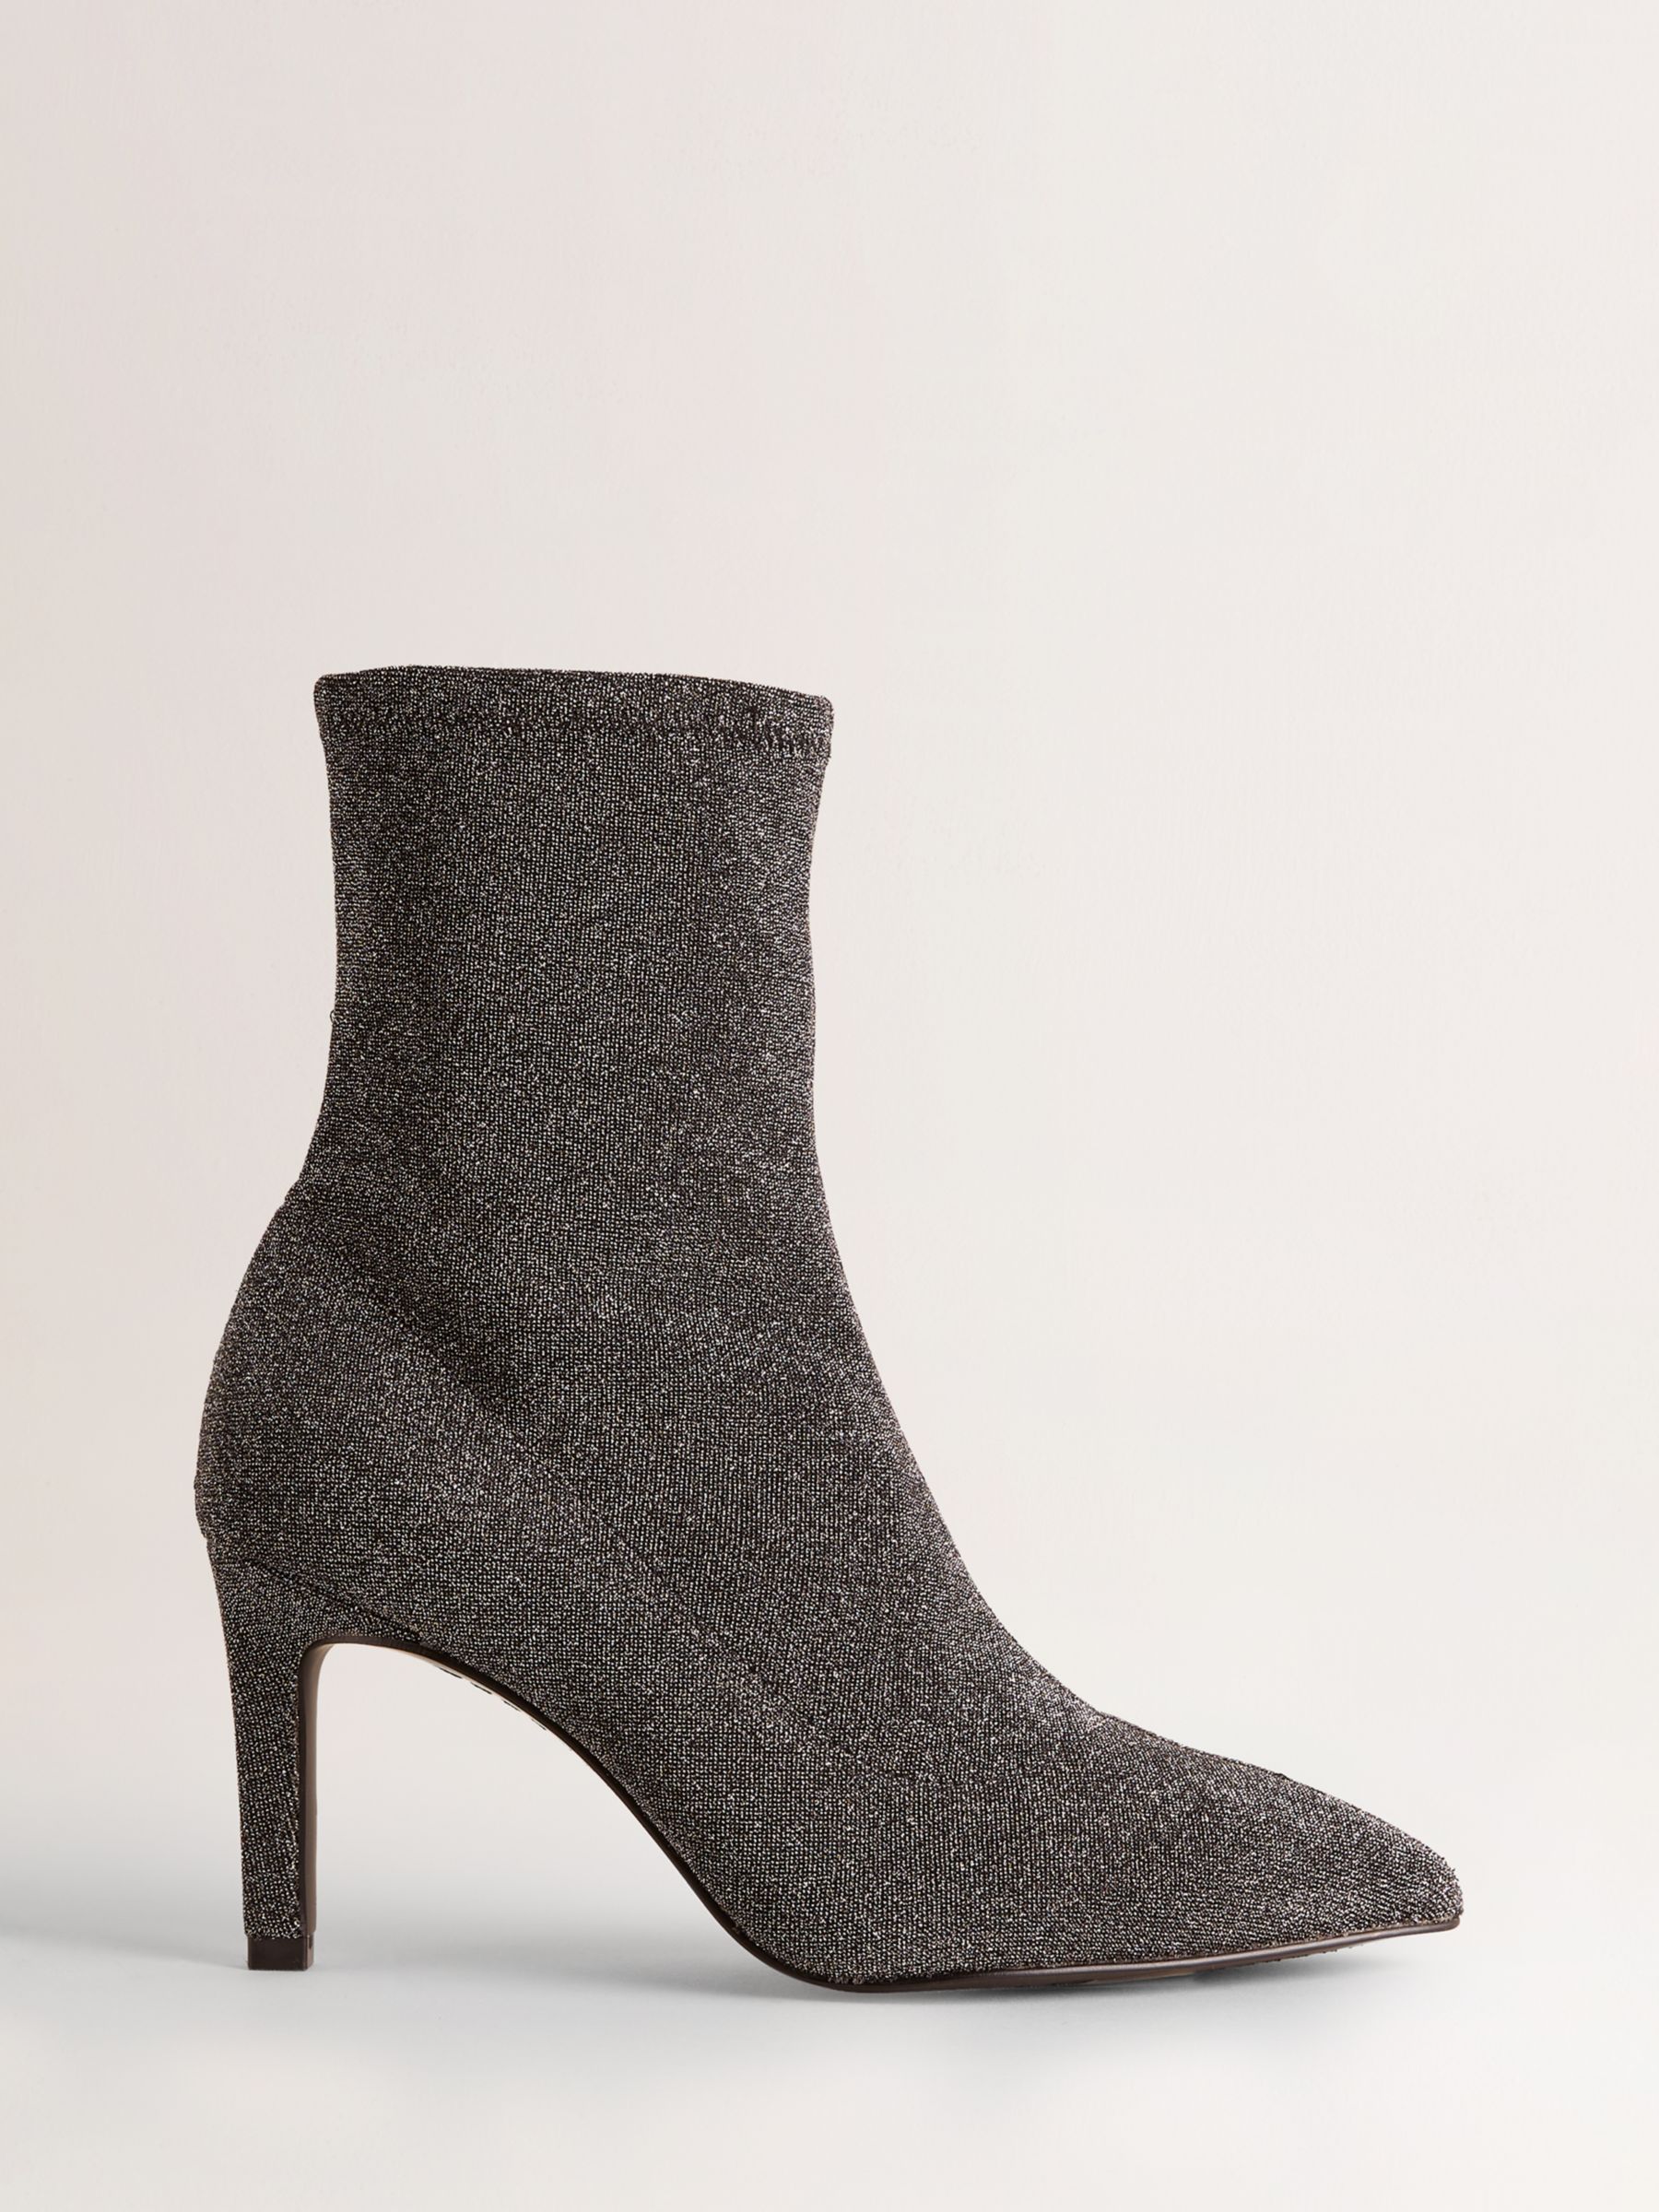 Boden Ankle Stretch Pointed Toe Boots, Gunmetal